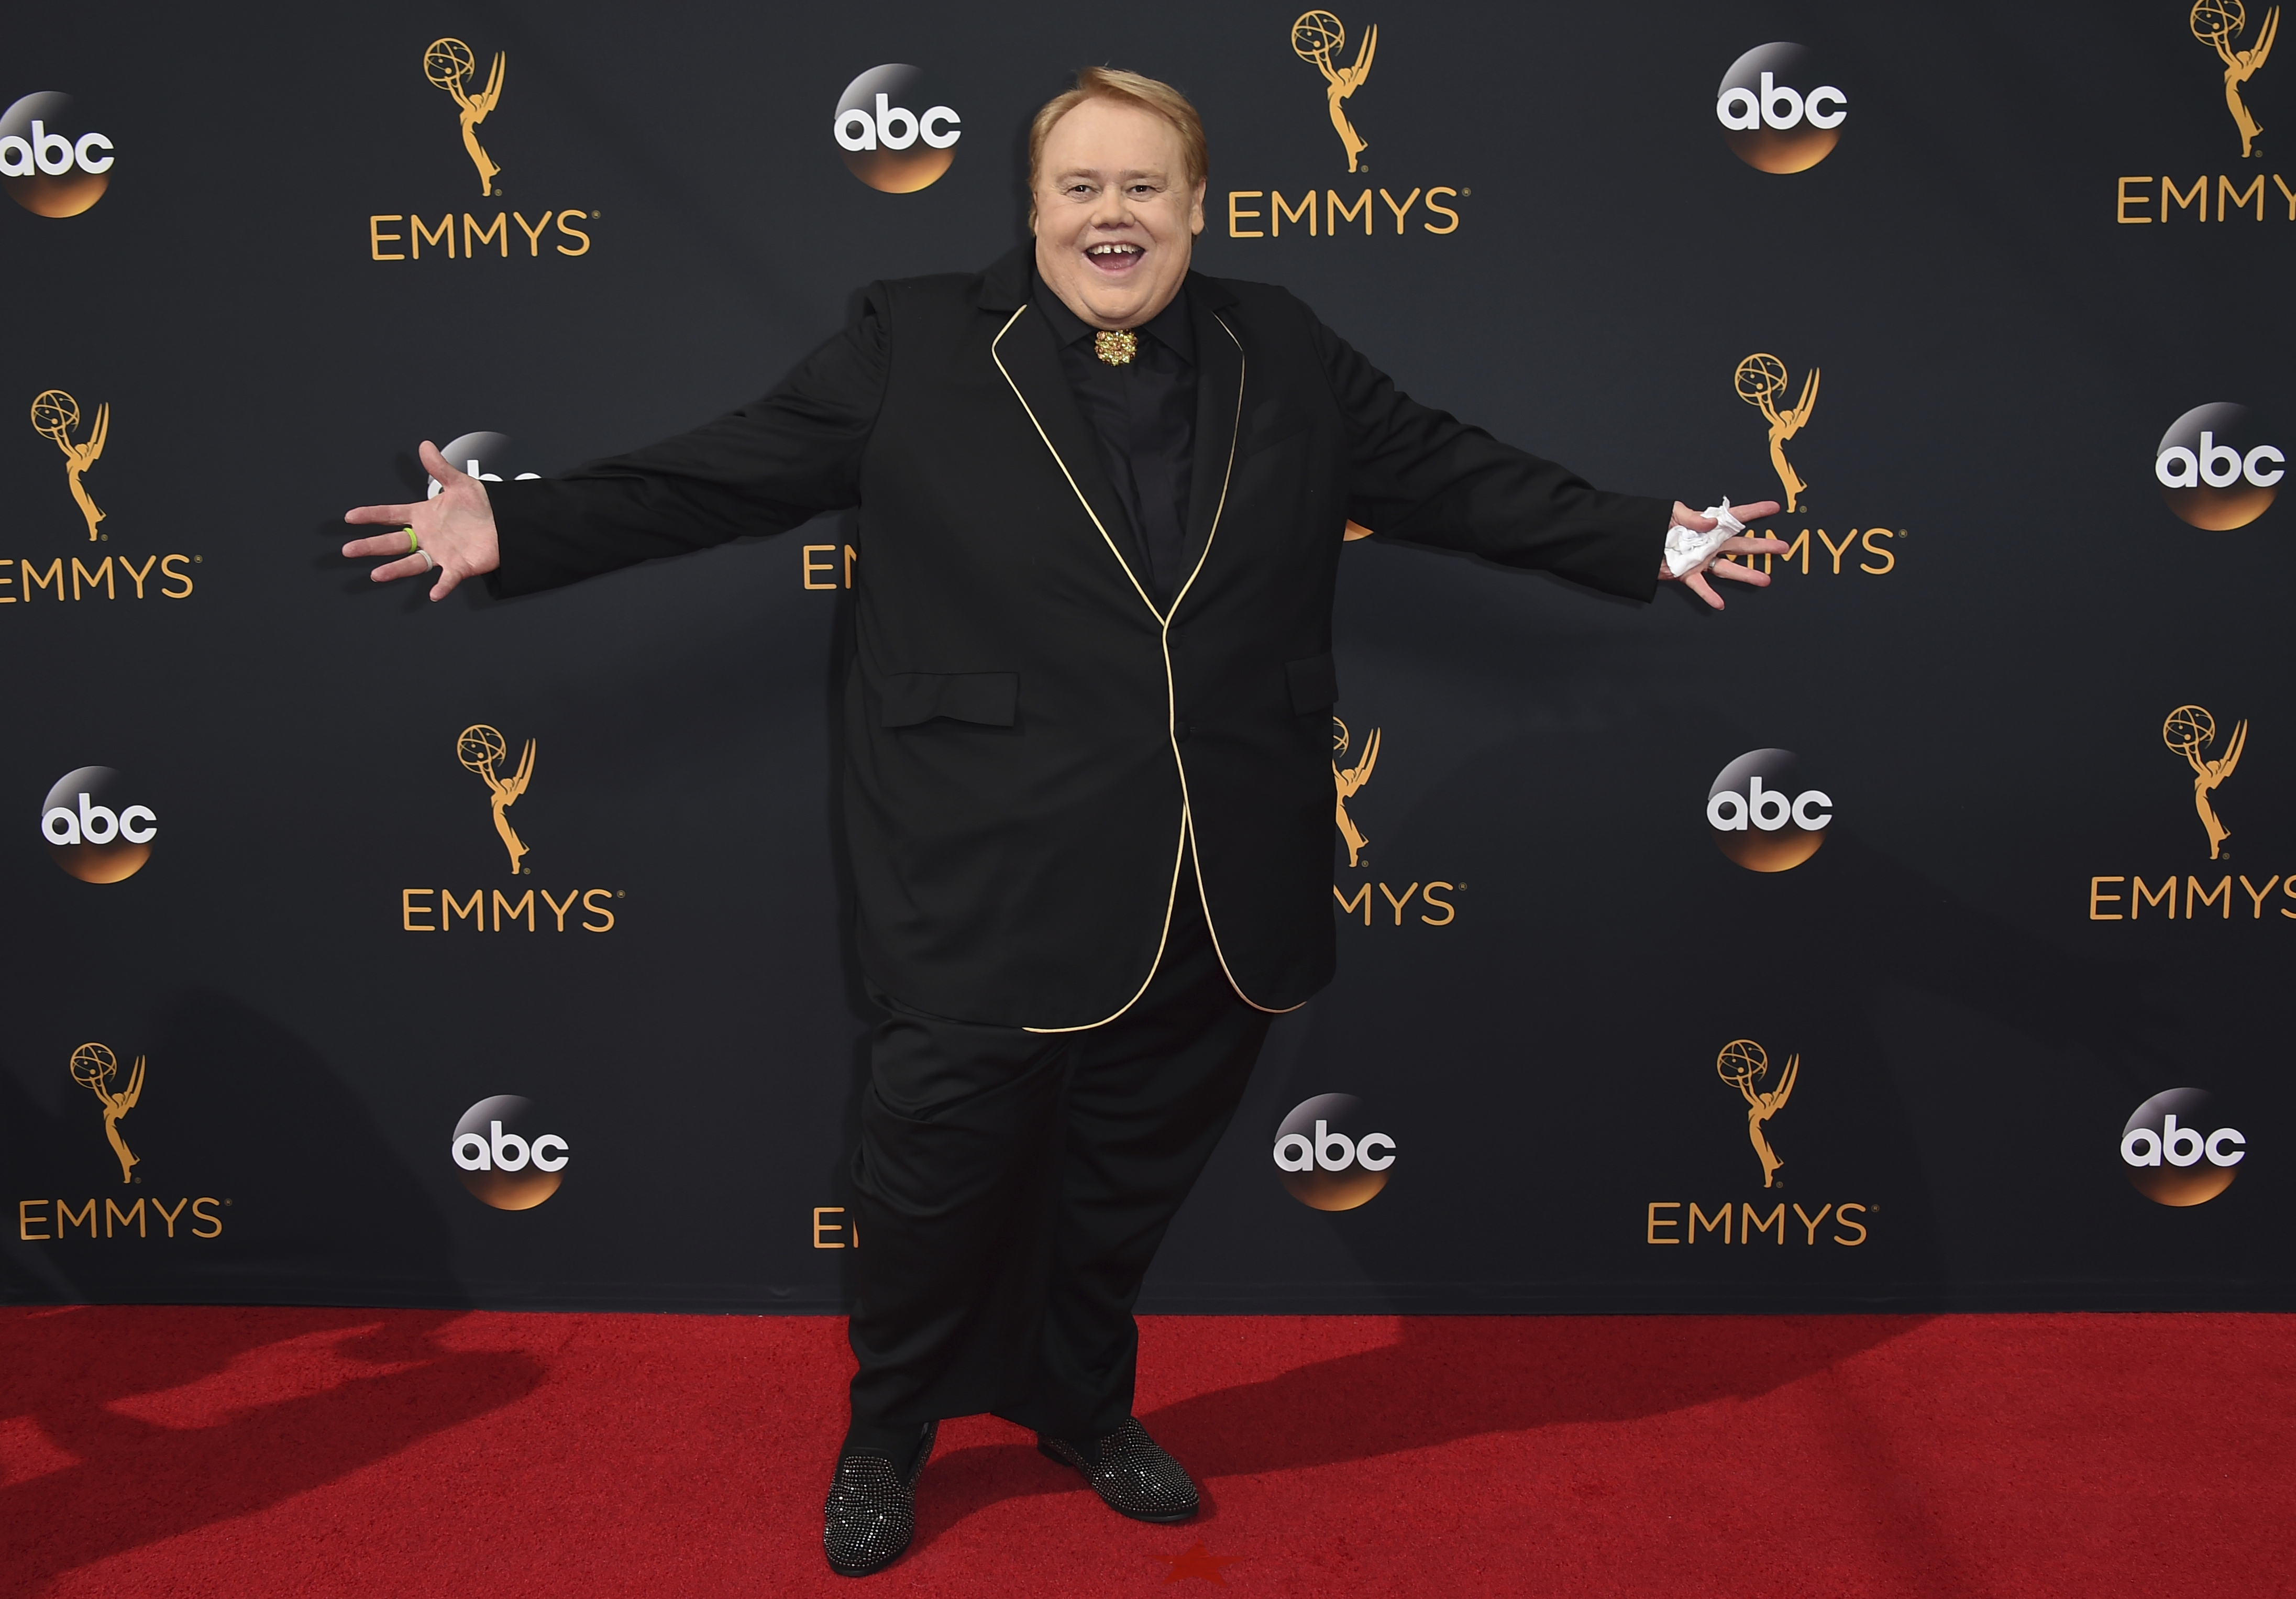 Louie Anderson arrives at the 68th Primetime Emmy Awards on Sunday, Sept. 18, 2016, in Los Angeles.